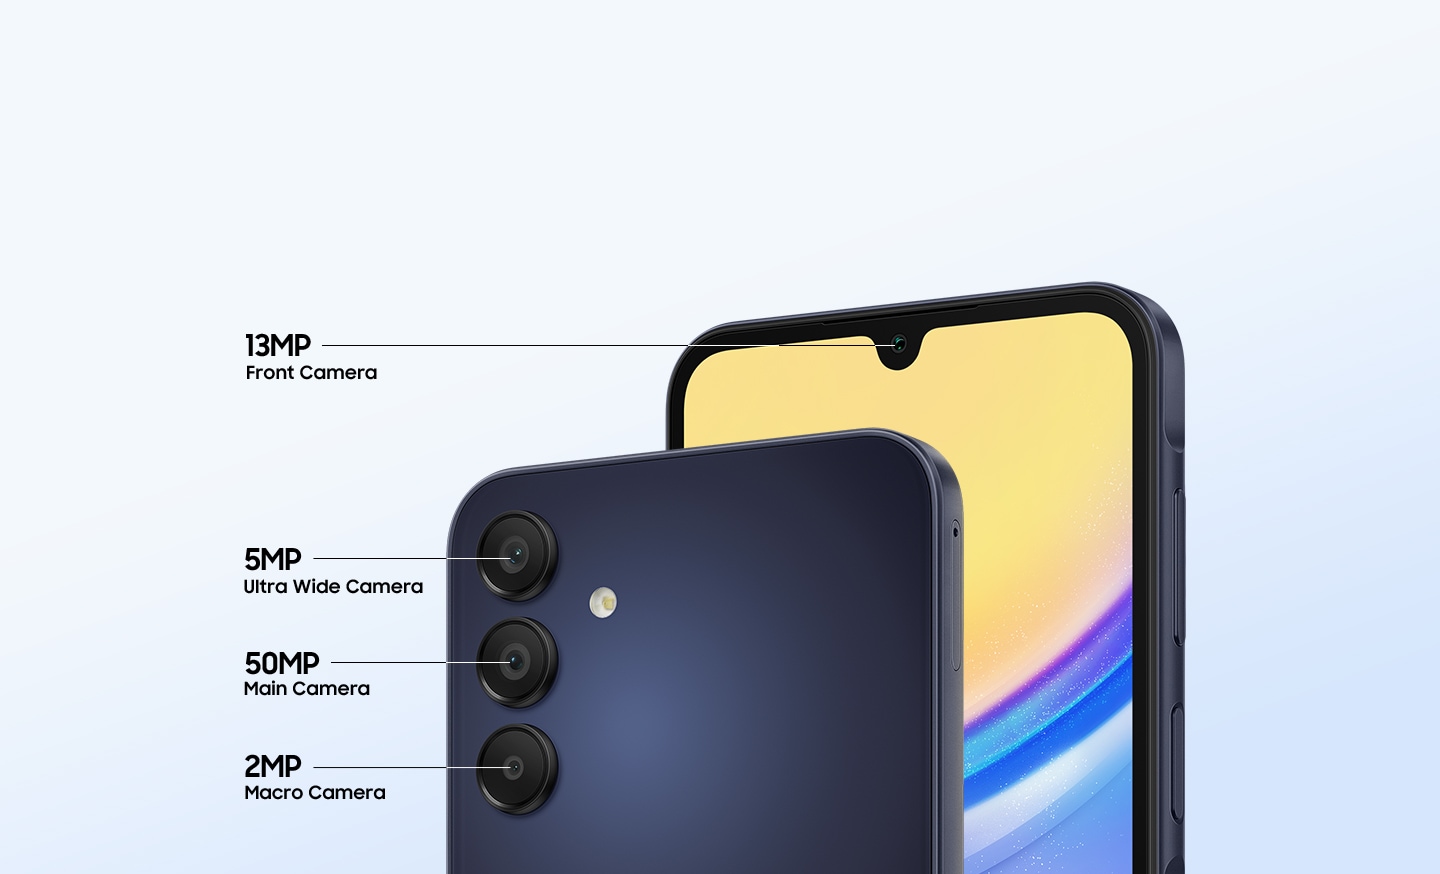 The front and back of the Galaxy A15 5G are shown to showcase its four multiple cameras including the 13MP Front camera, the 5MP Ultra Wide camera, the 50MP Main camera and the 2MP Macro camera.